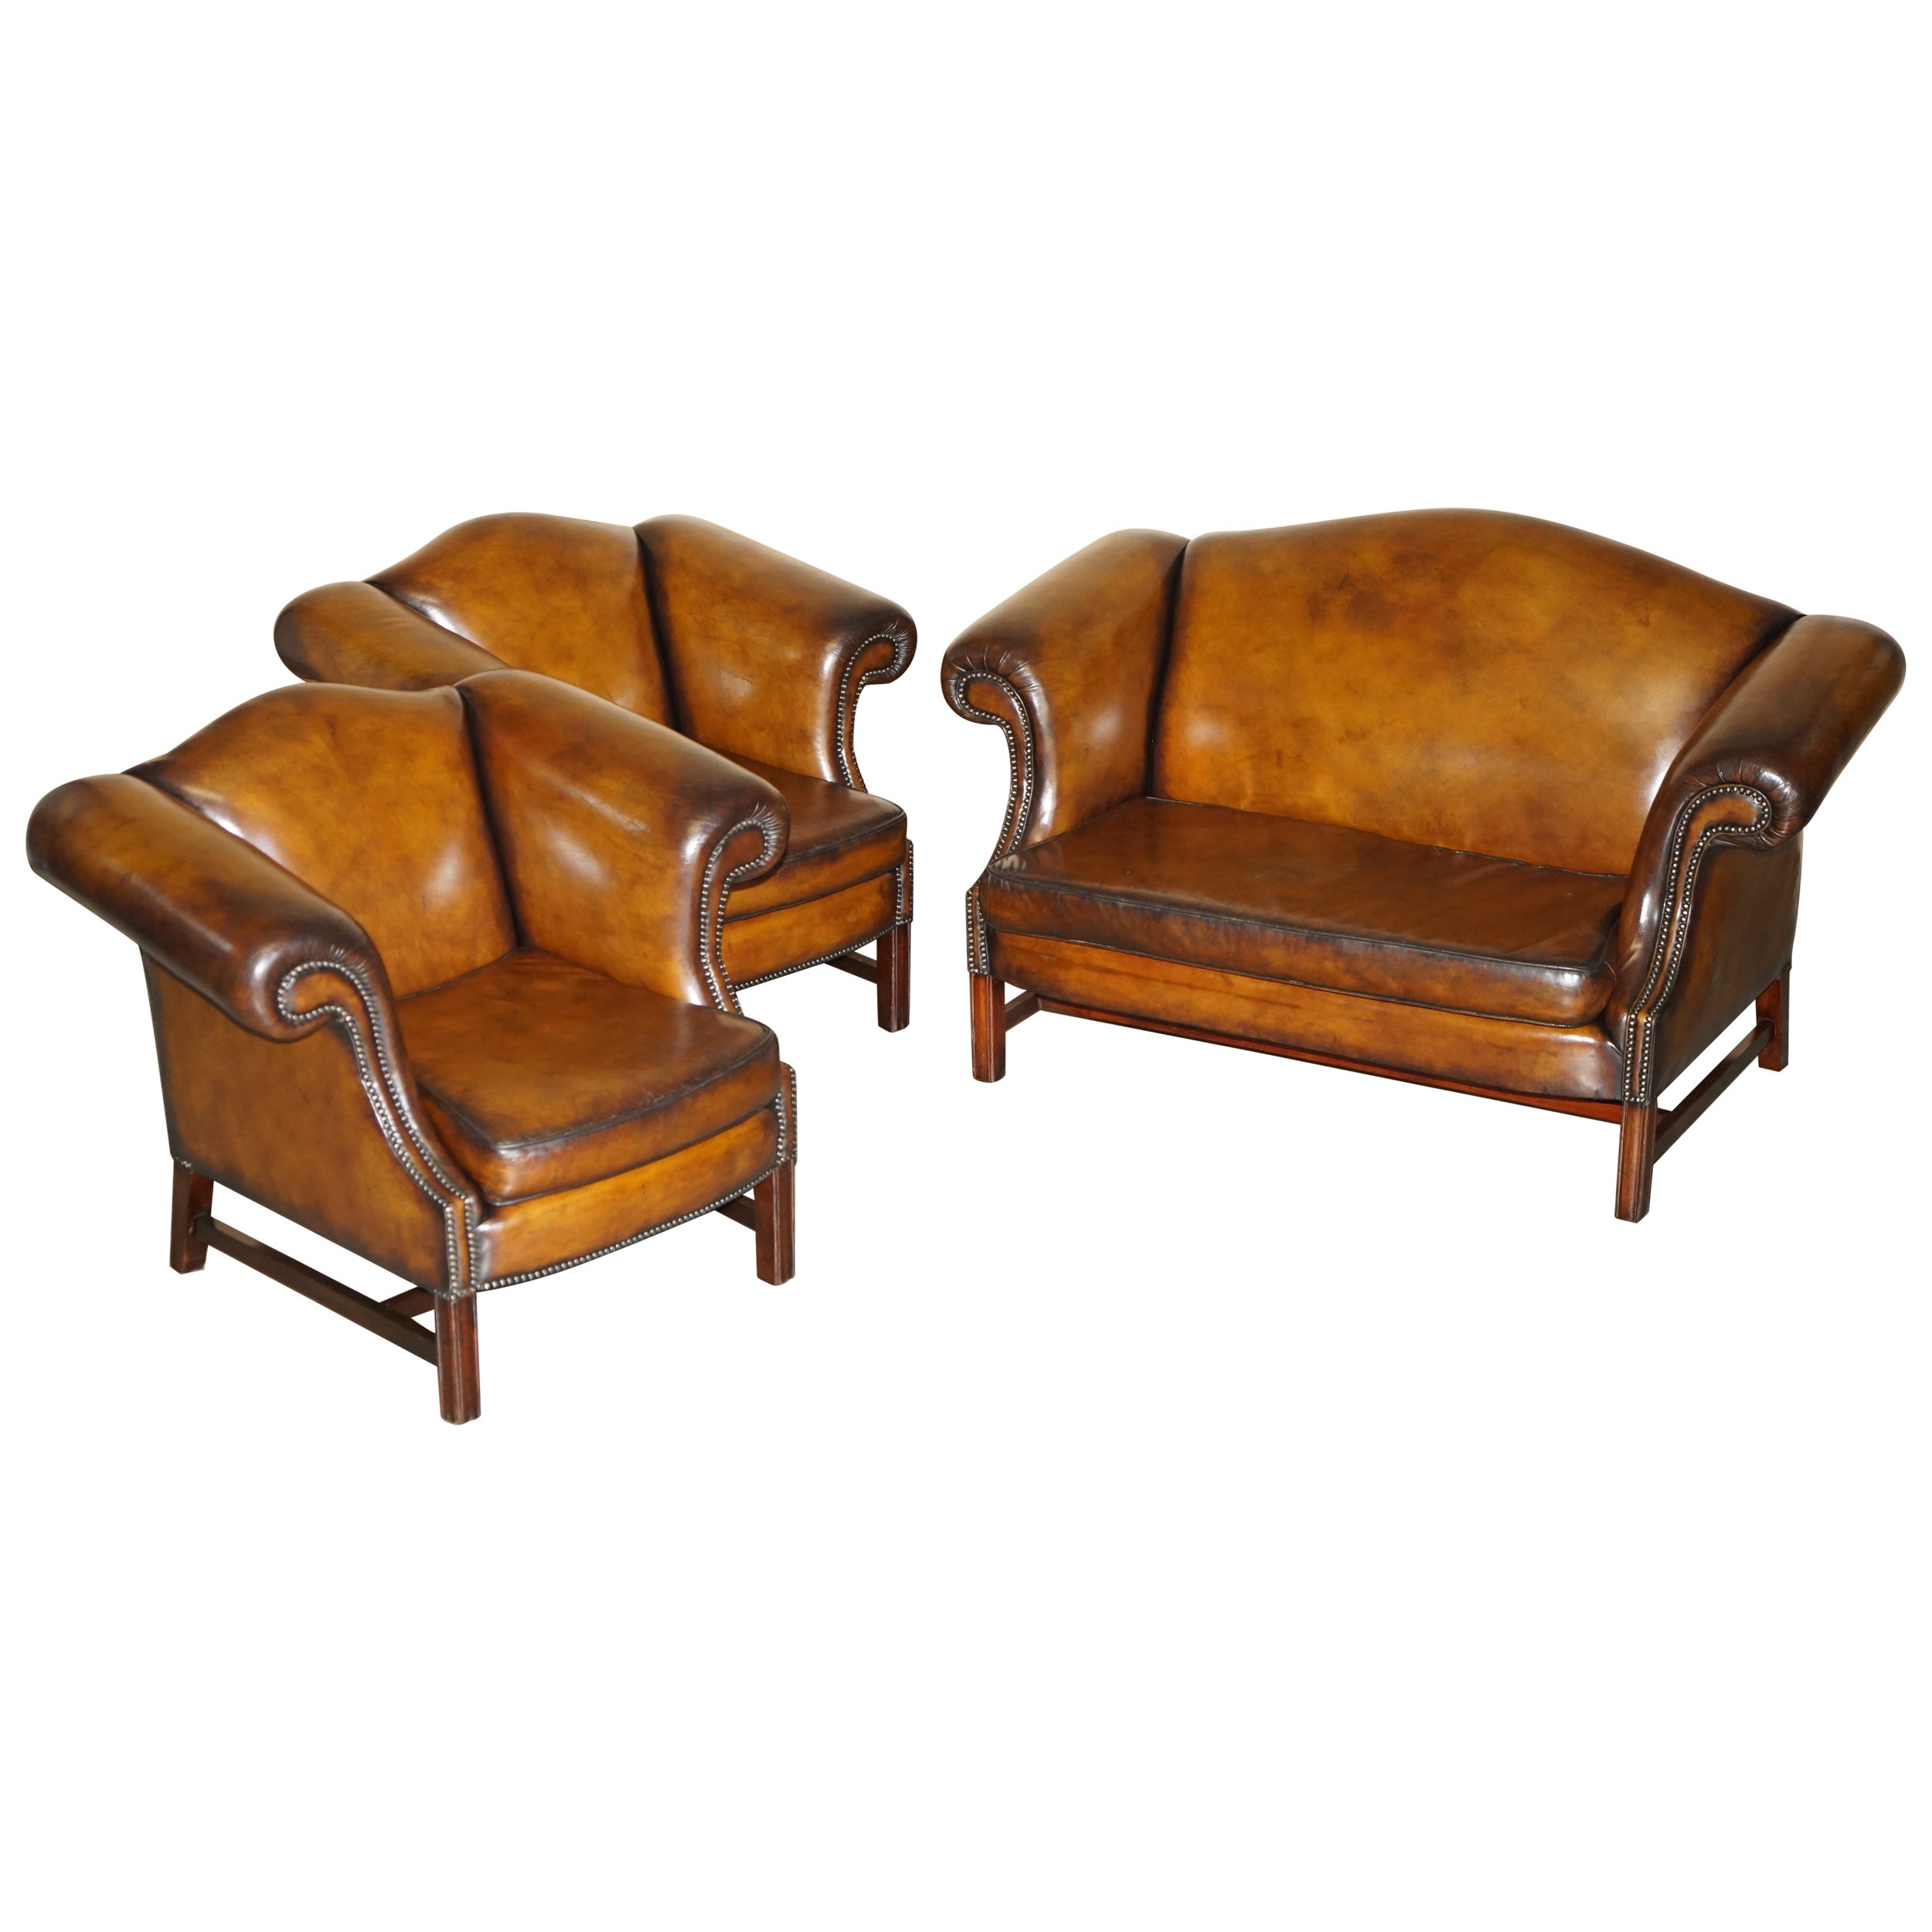 FINE ANTiQUE REGENCY HUMPBACK STYLE RESTORED BROWN LEATHER SOFA ARMCHAIR SUITE For Sale